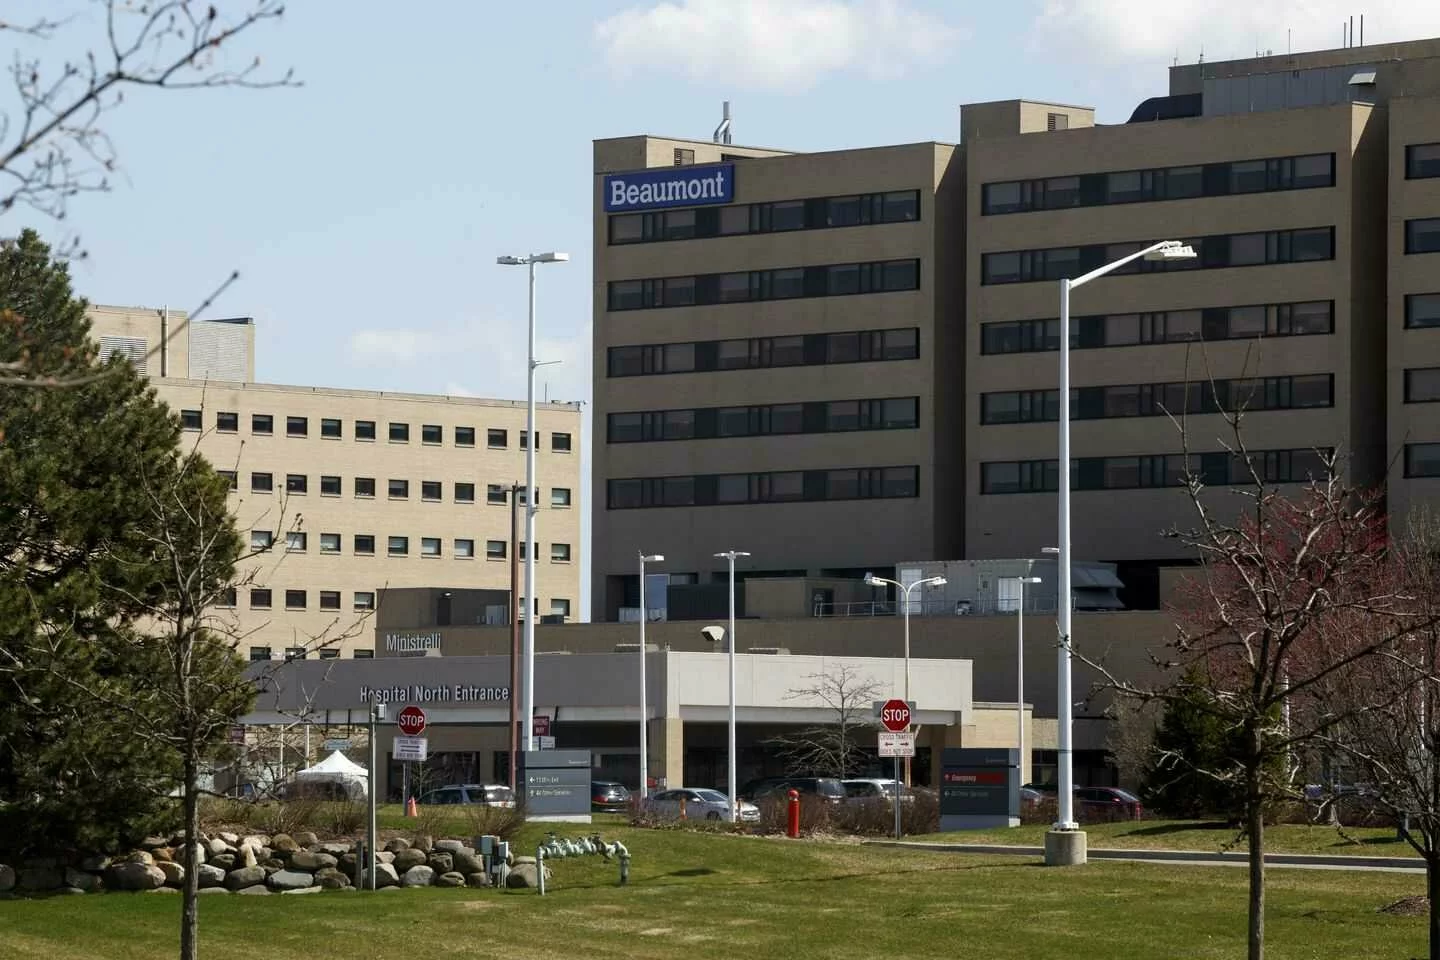 Michigan hospital system will test workers’ blood in effort to help reopen country